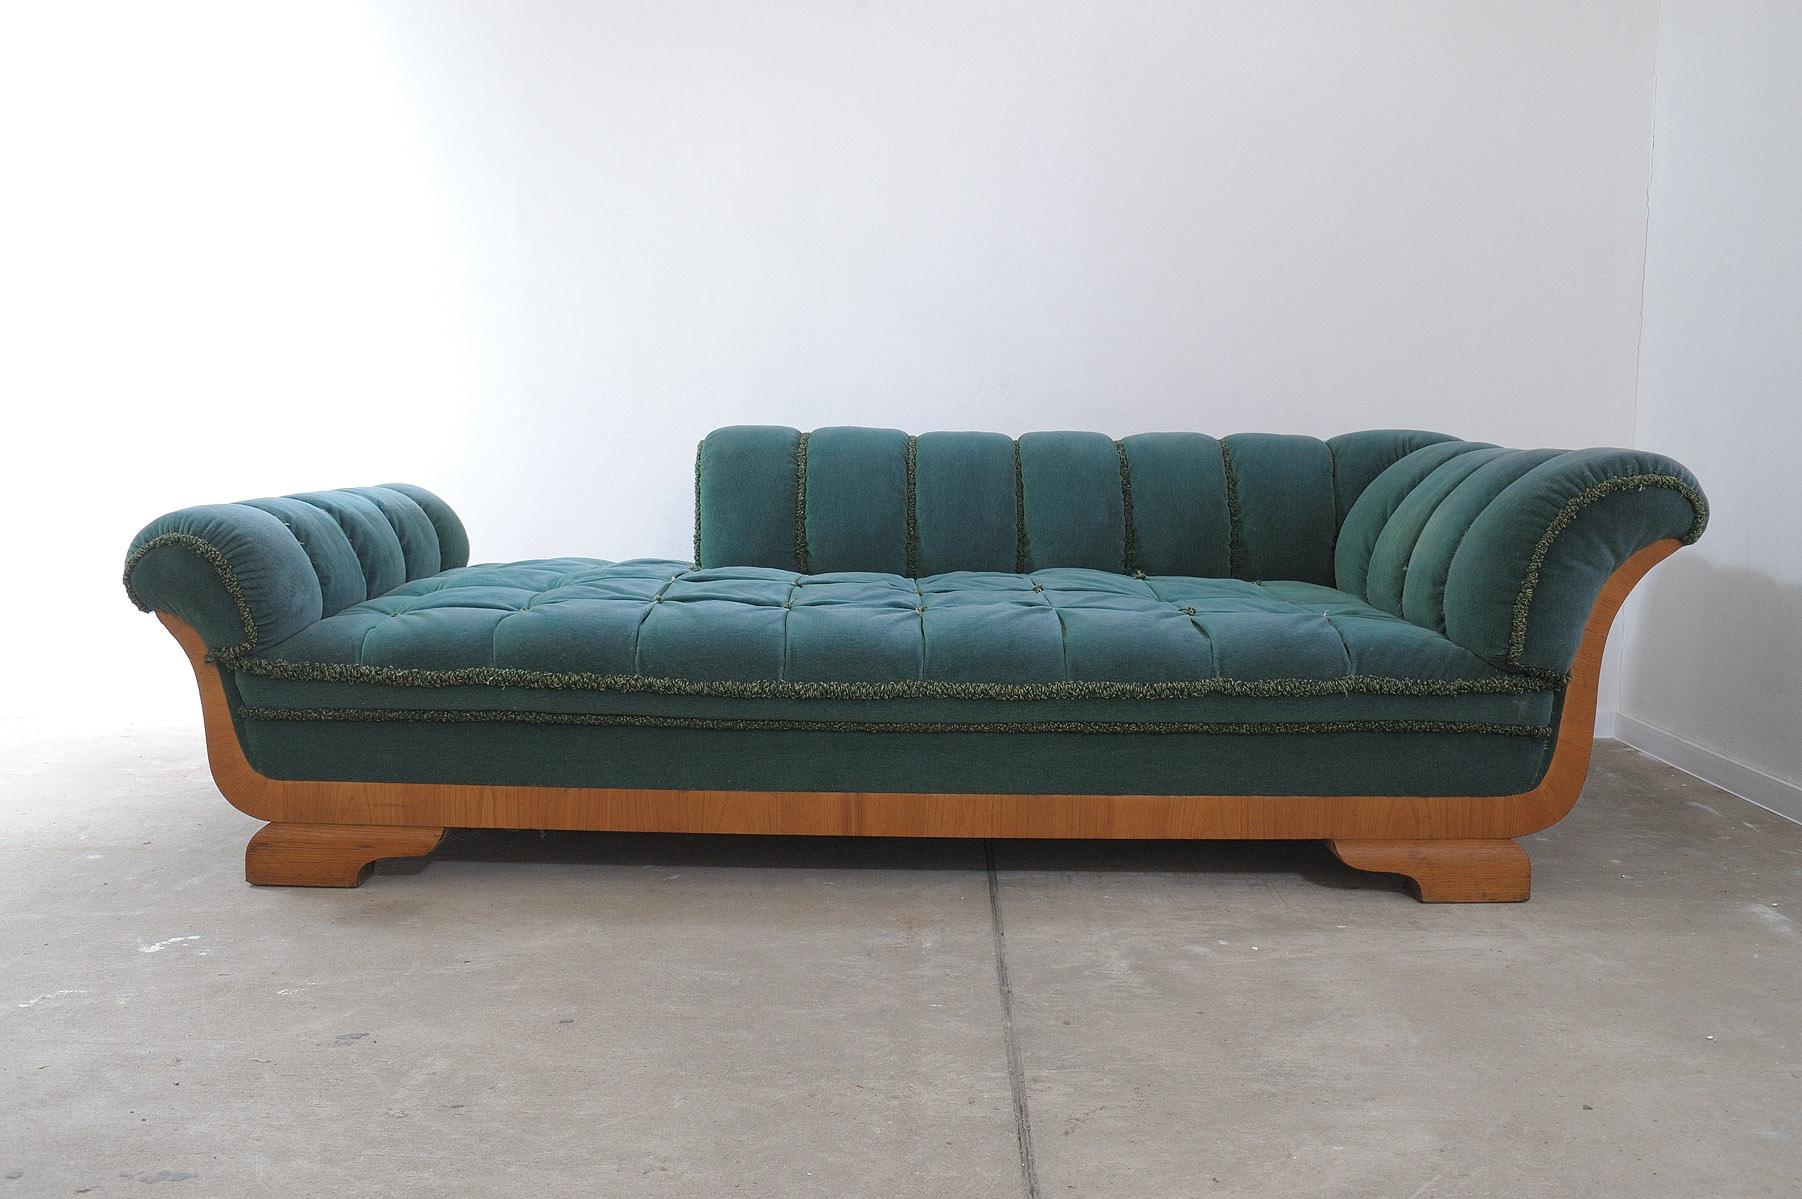 This daybed was made in the Biedermeier style in the former Czechoslovakia in the 1950´s. It has a wooden structure that is veneered with beech wood and is upholstered with a fabric.

Sofa is in good structural condition, shows signs of age and